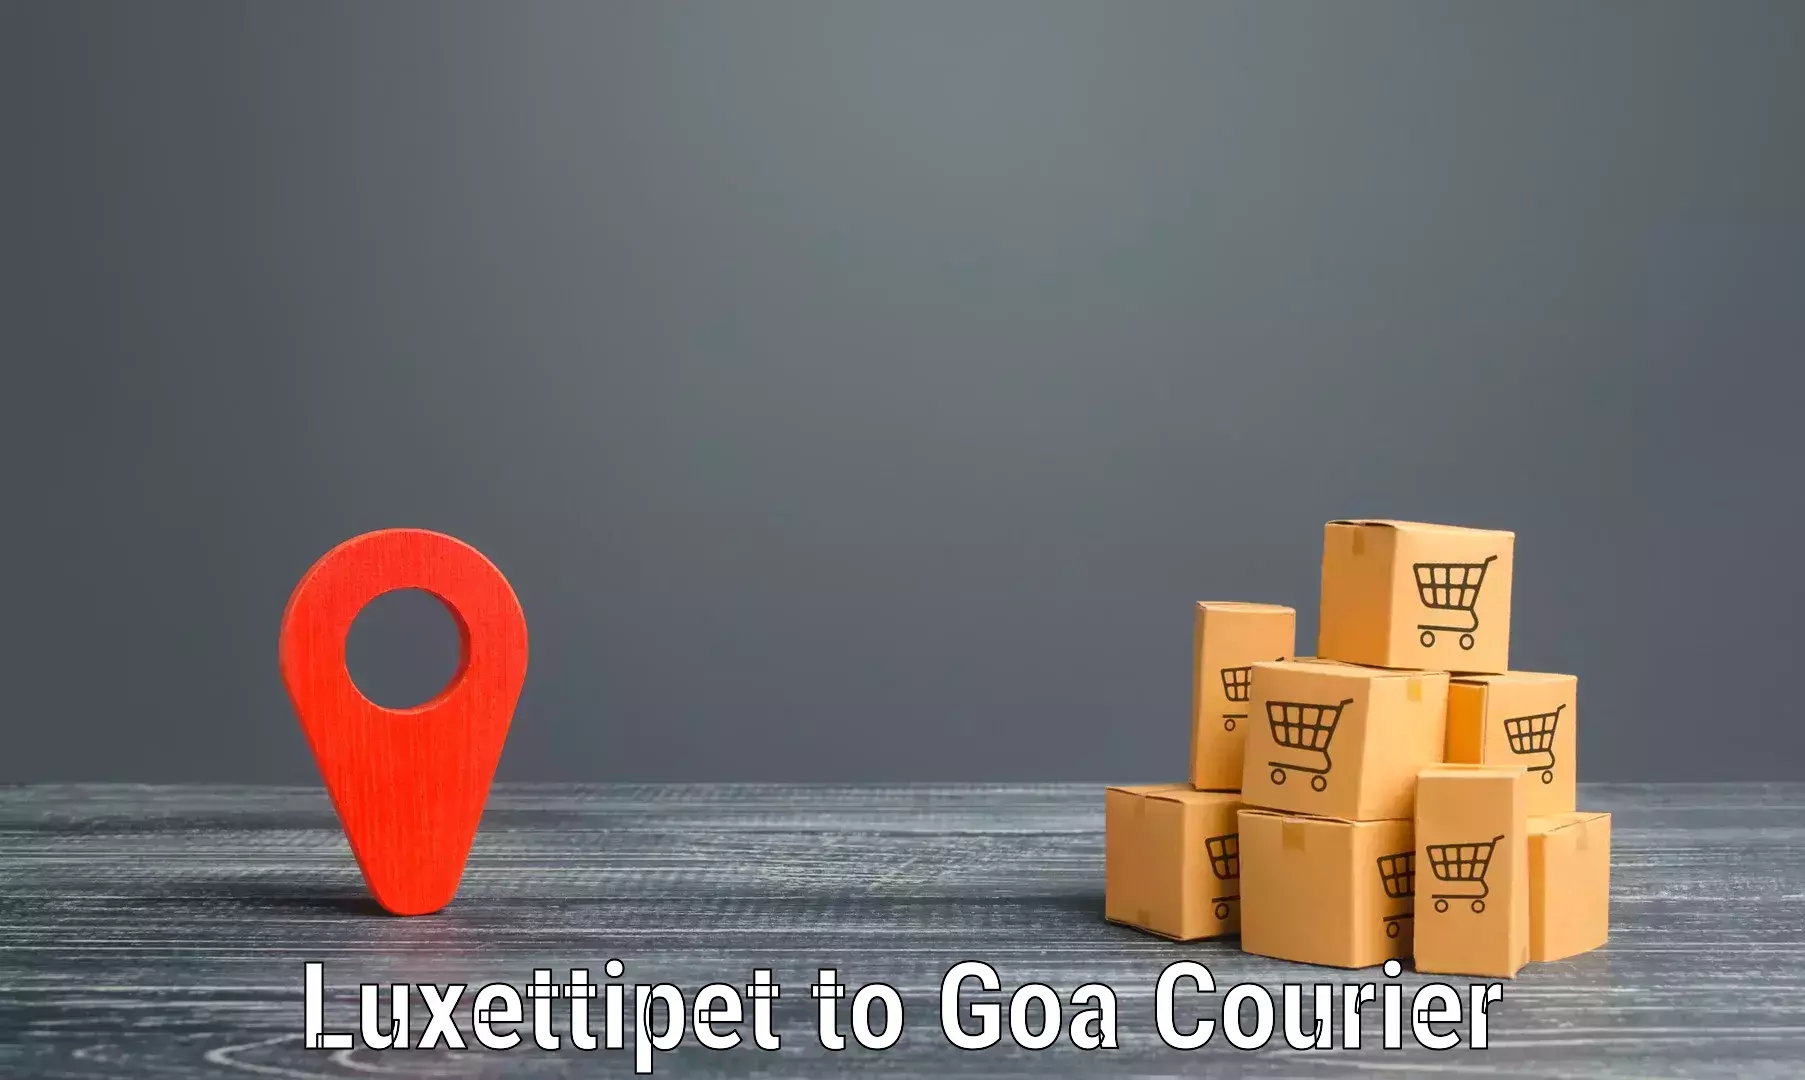 Flexible delivery scheduling in Luxettipet to South Goa